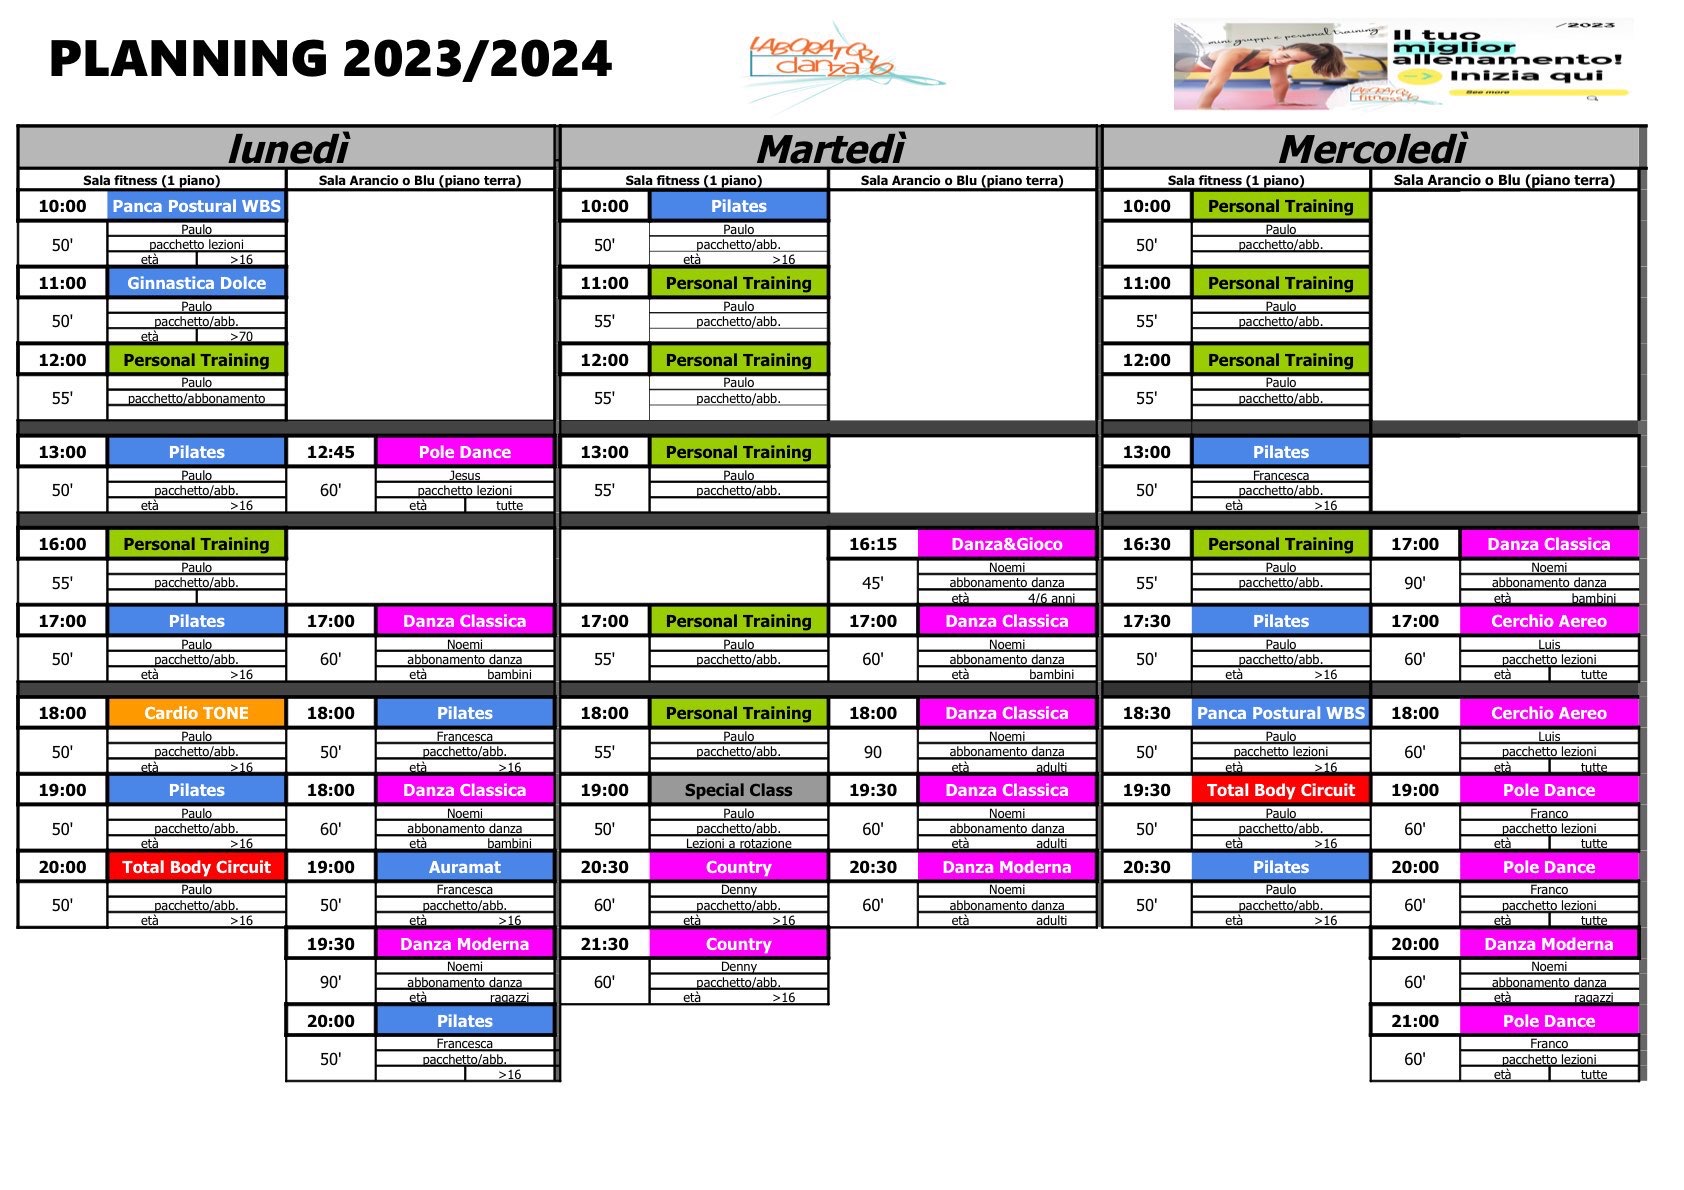 Planning UFFICIALE 23-24